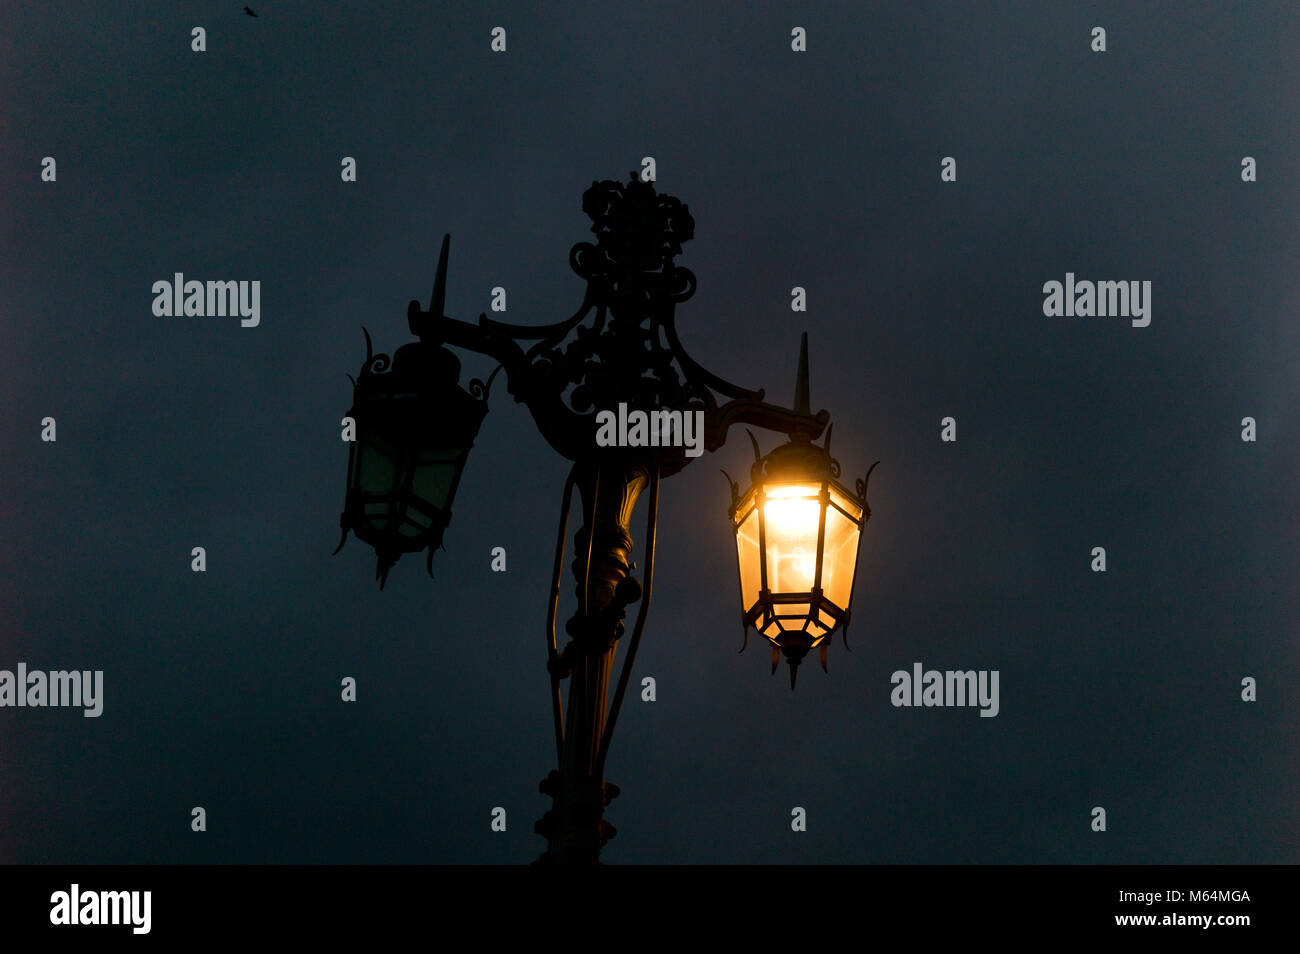 Ornate double victorian style streetlight, one lamp on, one lamp off Stock Photo